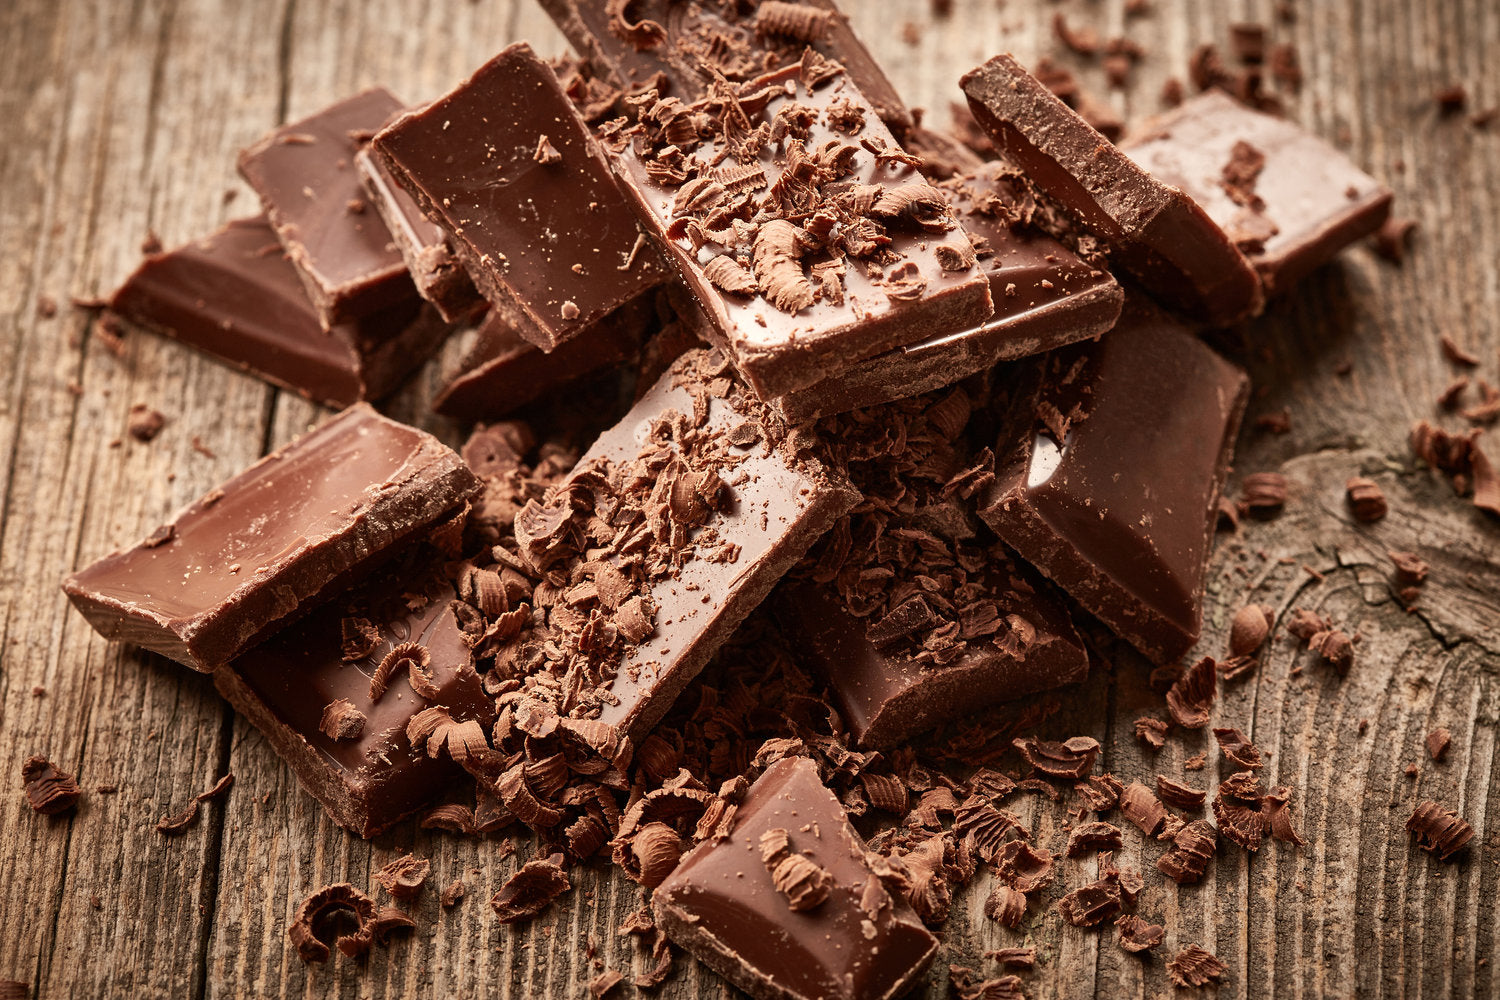 Lead & Cadmium Found in Chocolate – Is it in Your Favorite Brand?